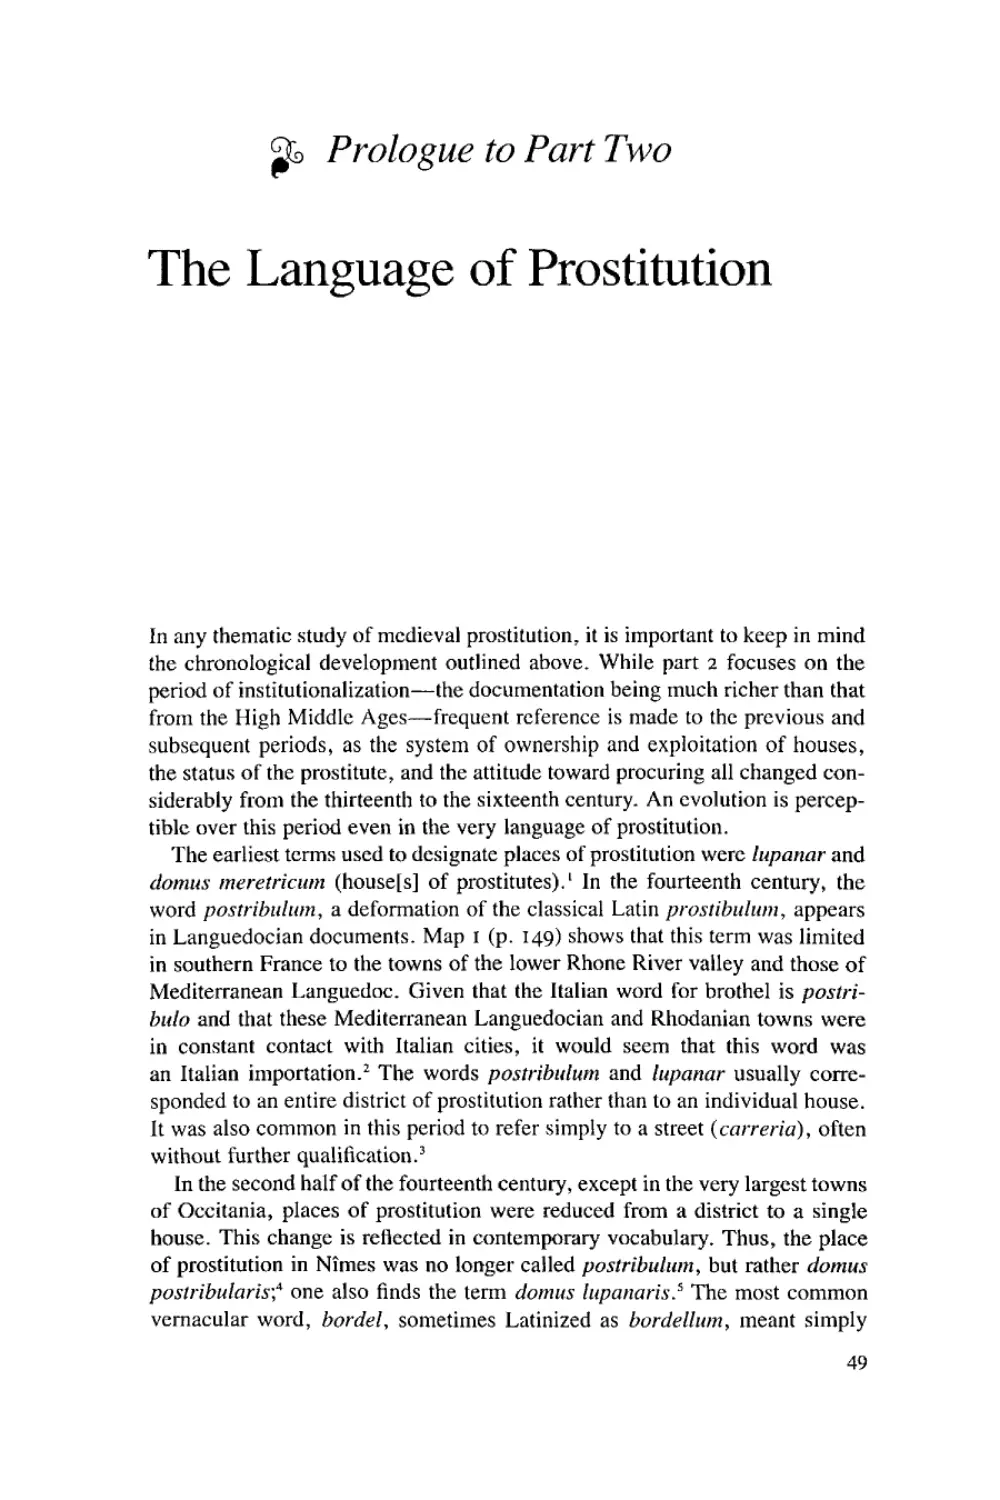 Part Two: Structures and Dynamics of Institutionalized Prostitution